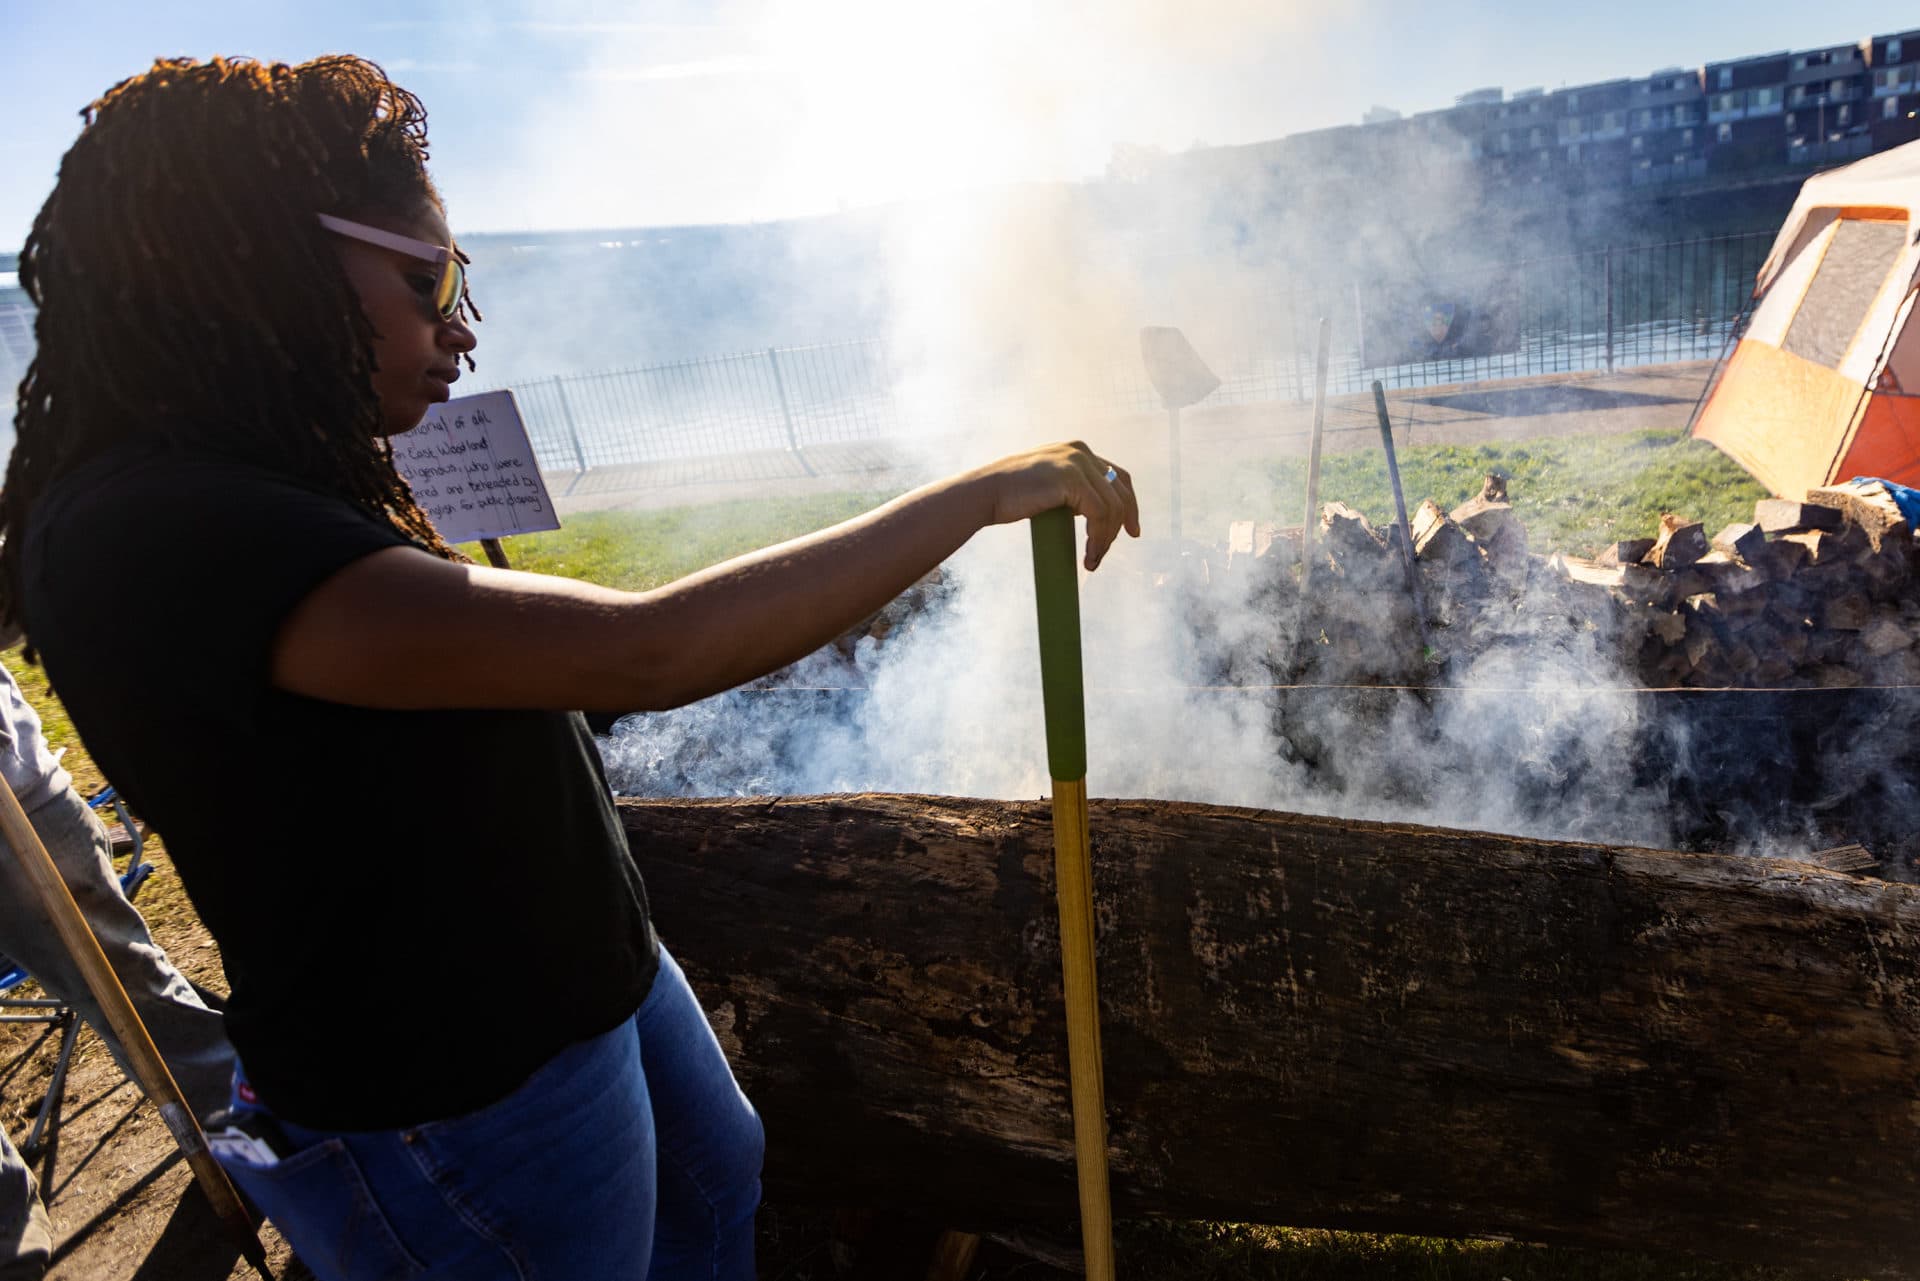 Jenny Oliver, a member of the Massachusett Tribe at Ponkapoag, watches the fire while burning a traditional mishoon at the Charlestown Little Mystic Boat Slip. (Jesse Costa/WBUR)